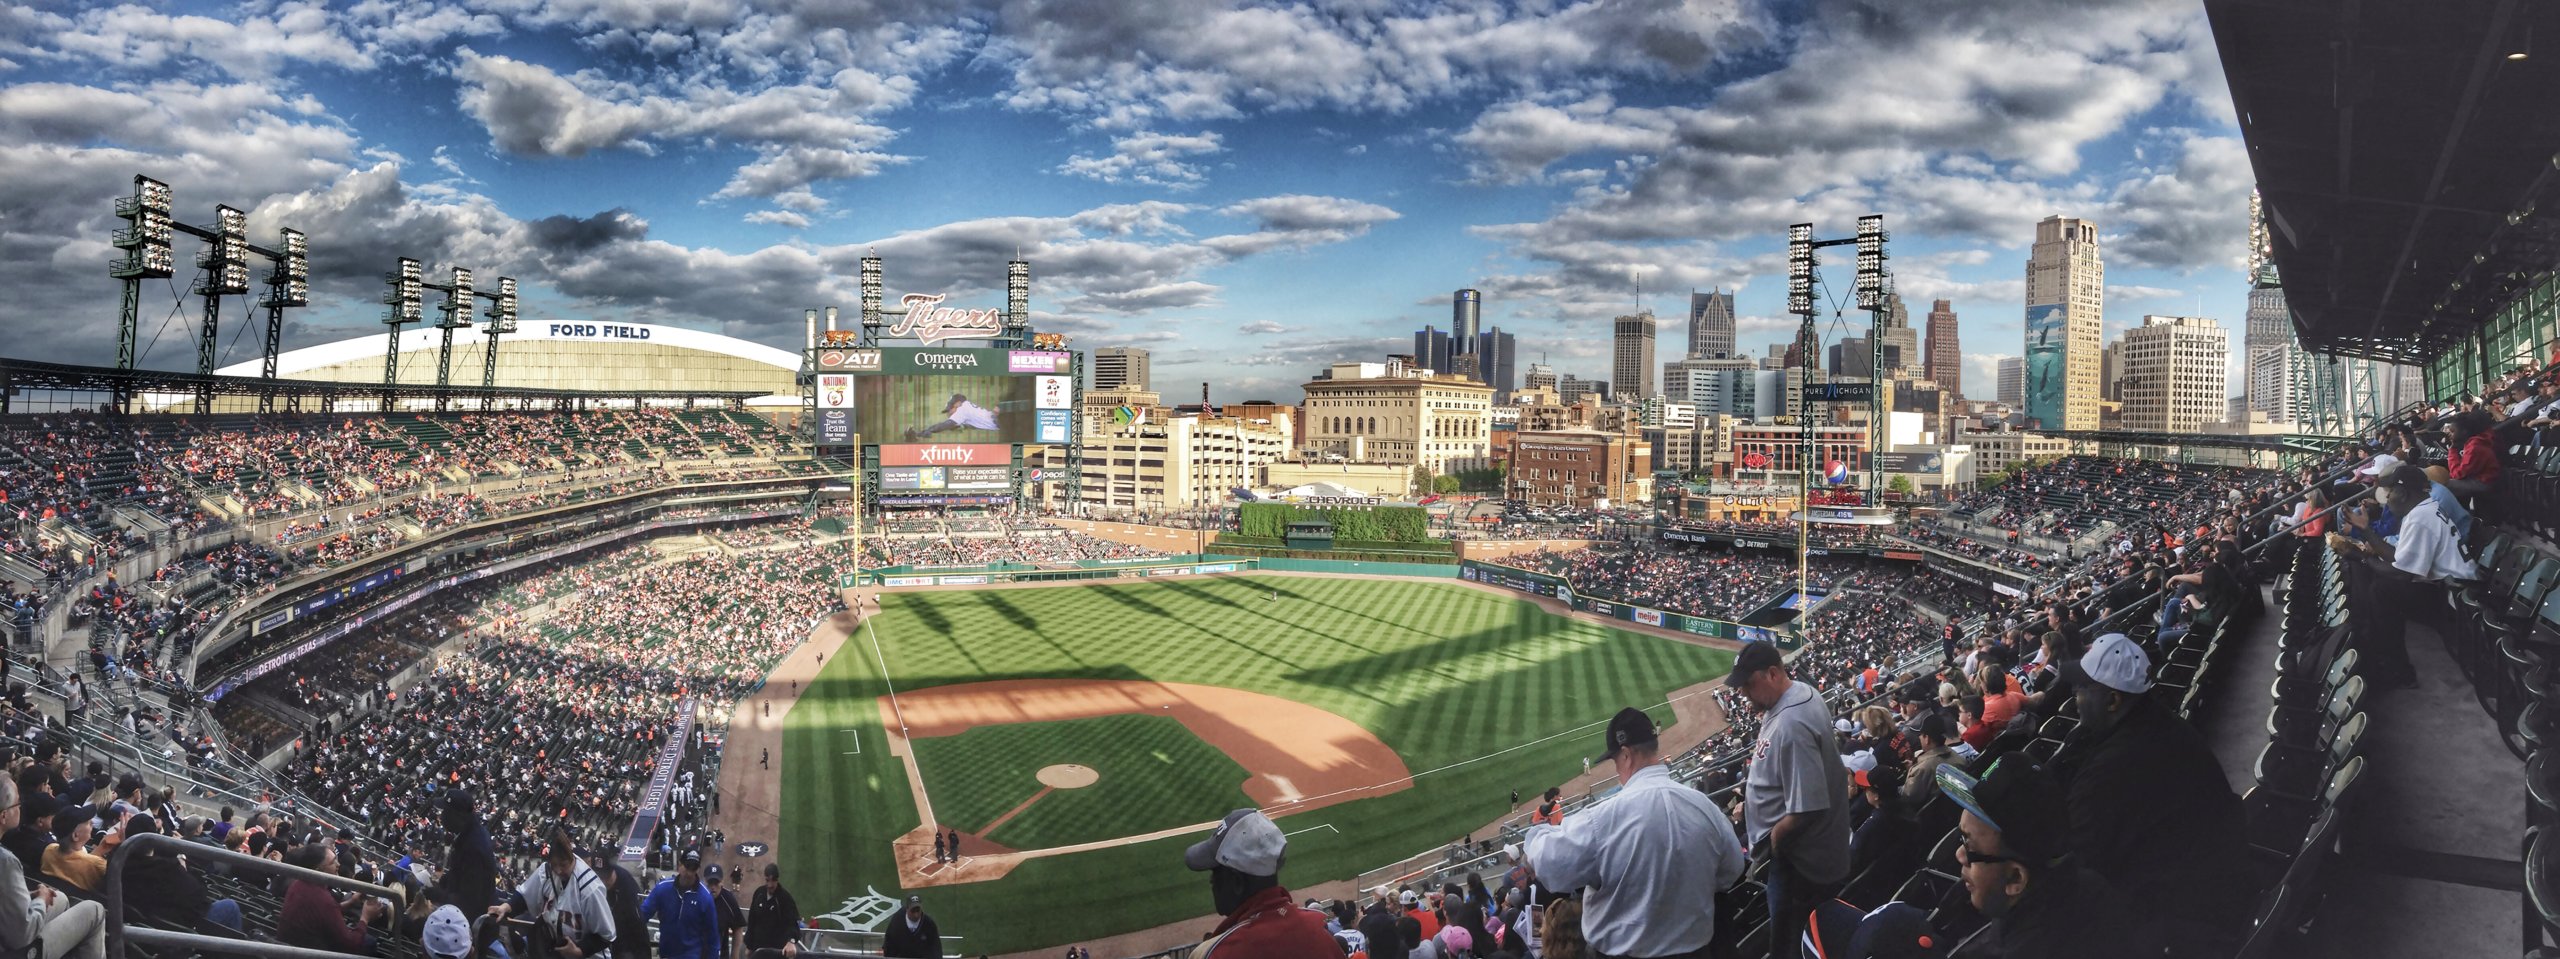 Comerica Park in Detroit, MI - Home of the Detroit Tigers